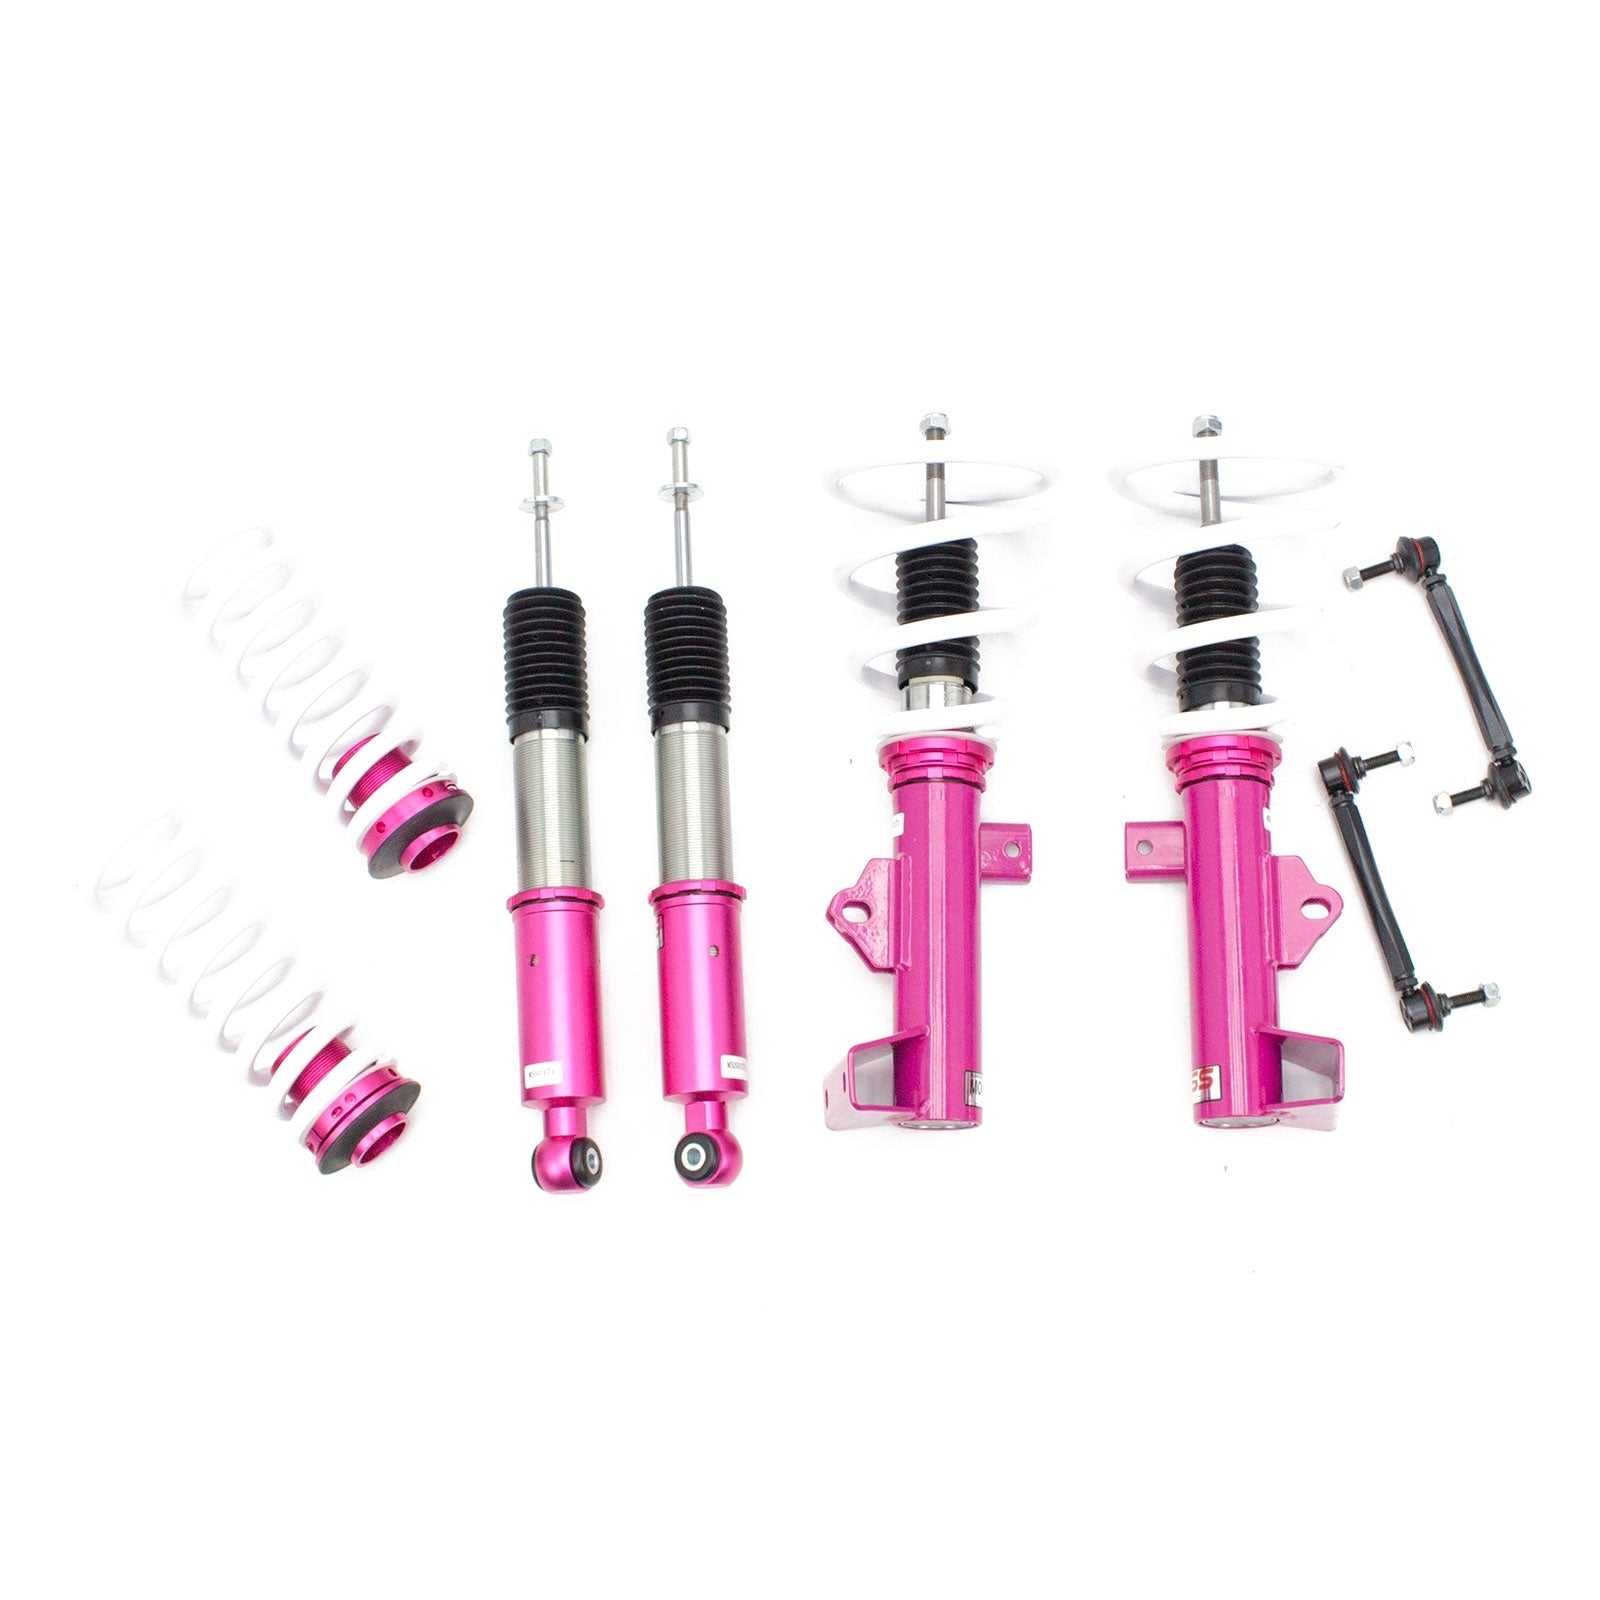 Godspeed(MSS0171-B) MonoSS Coilover Lowering Kit, Fully Adjustable, Ride Height, Spring Tension And 16 Click Damping, Merceds-Benz CLK(A209/C209) 2003-09